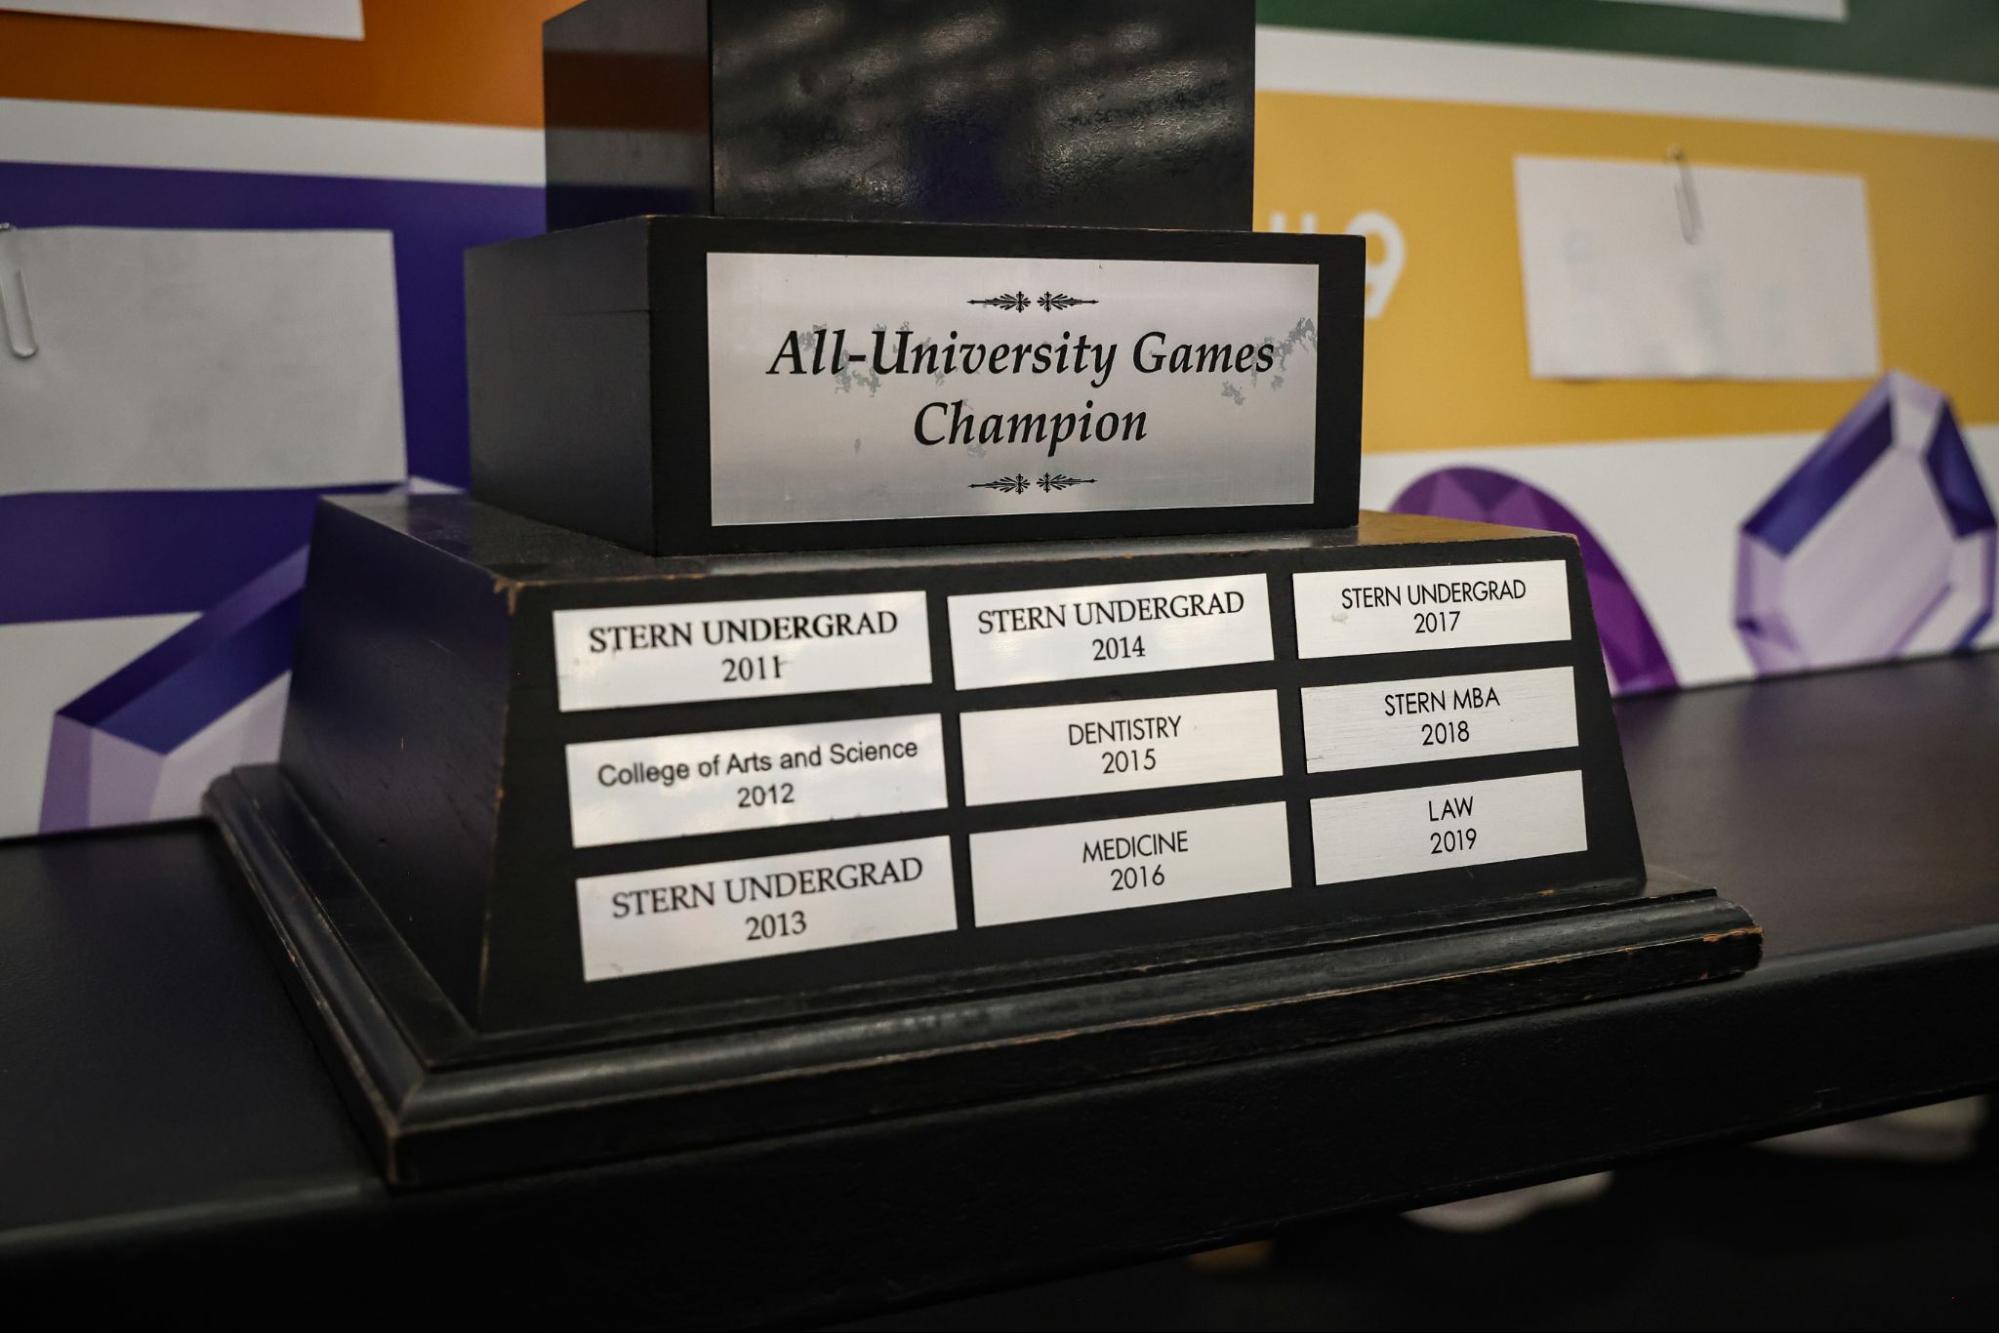 A trophy engraved with the text “All-University Games Champion” that has plaques with each champion from 2011 to 2019.